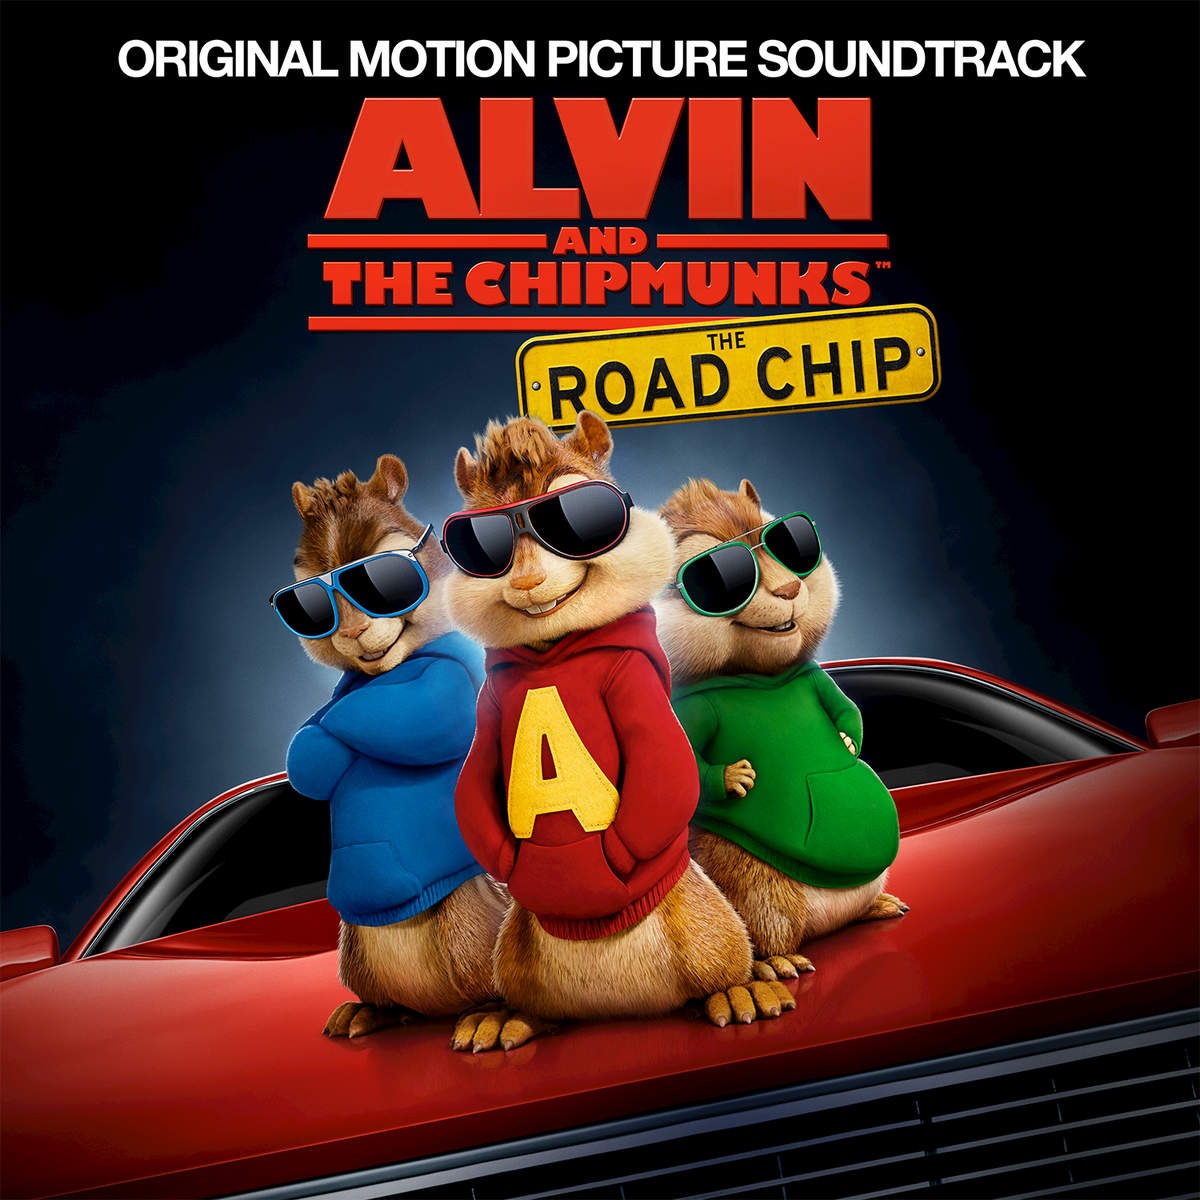 Alvin and the Chipmunks: The Road Chip (Original Motion Picture Soundtrack)